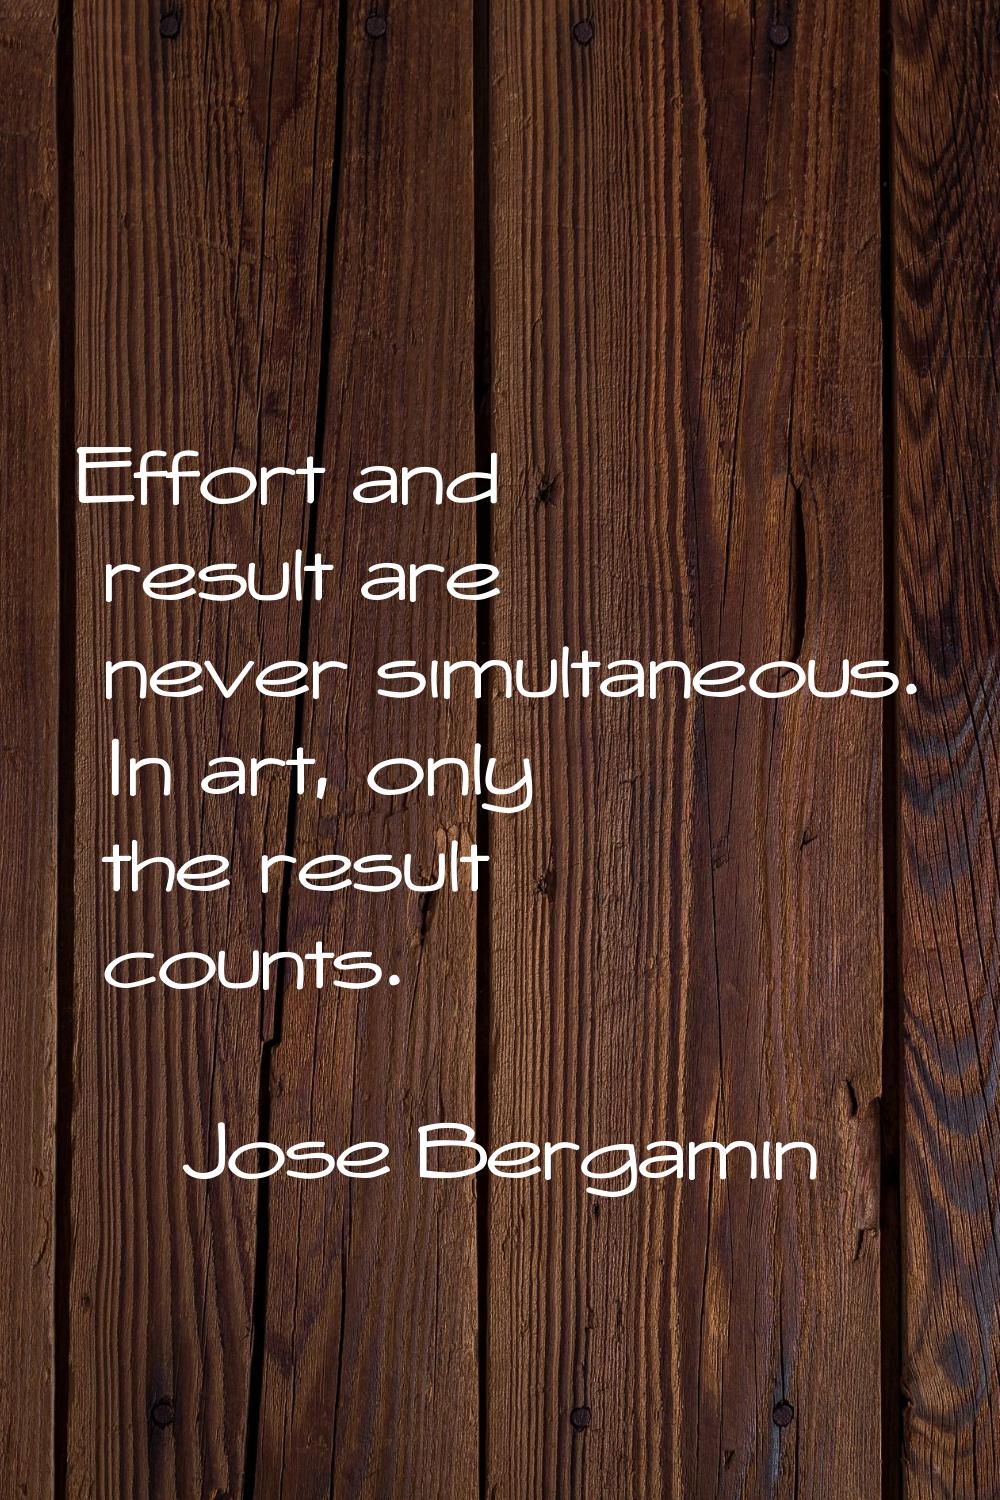 Effort and result are never simultaneous. In art, only the result counts.